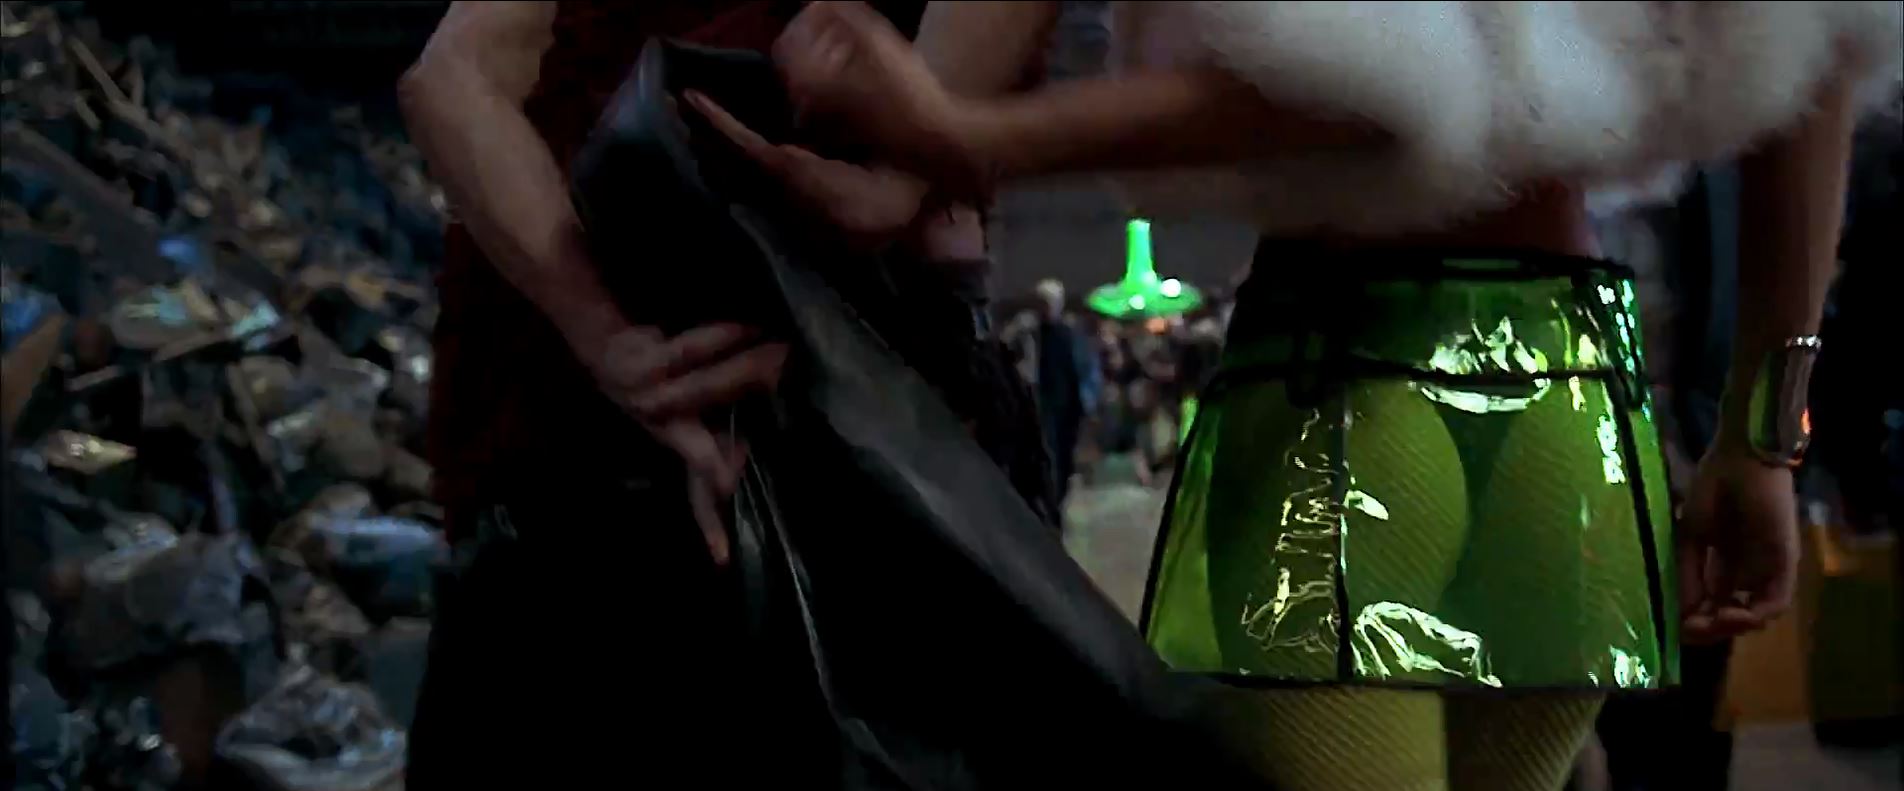 eve salvail thong green skirt - The Fifth Element